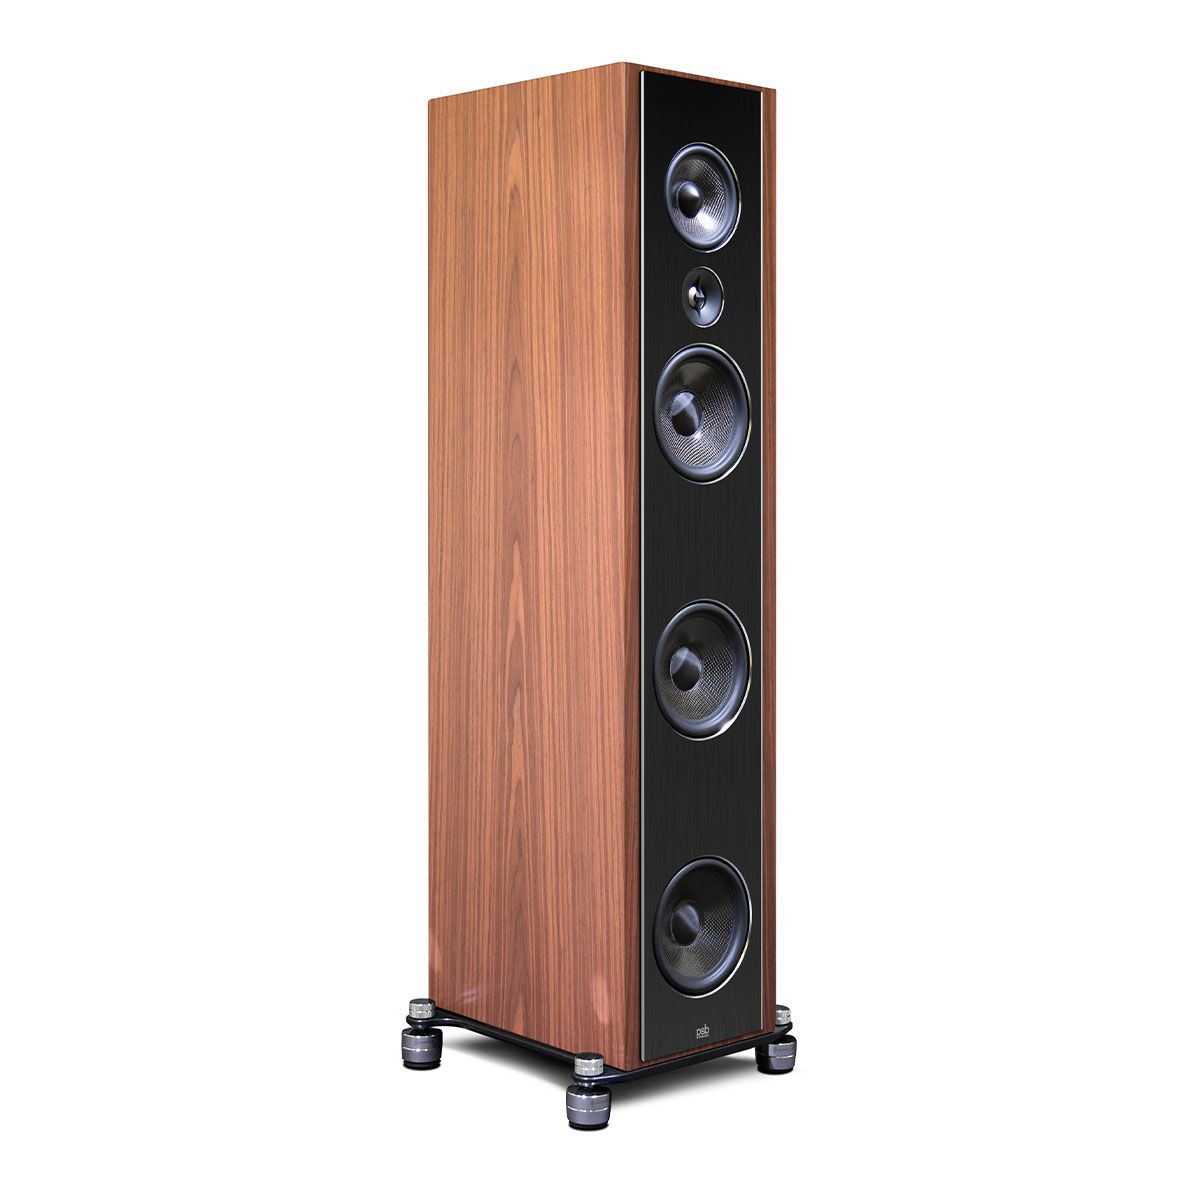 PSB Synchrony T800 Premium Tower Speaker - single walnut - angled front view